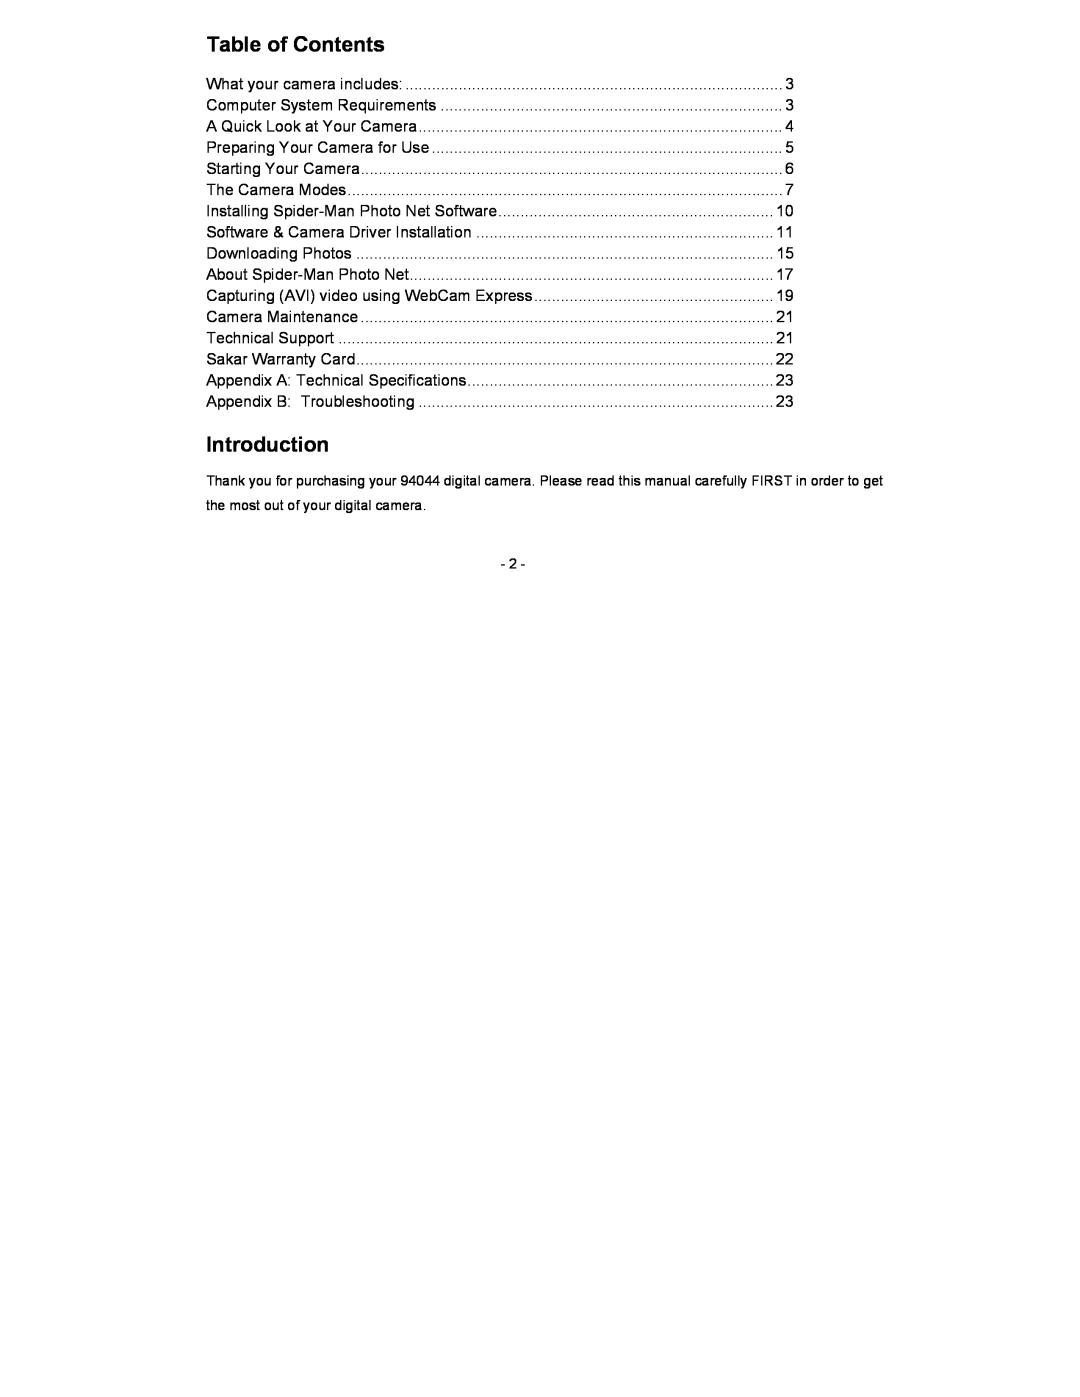 Sakar 94044 owner manual Table of Contents, Introduction 